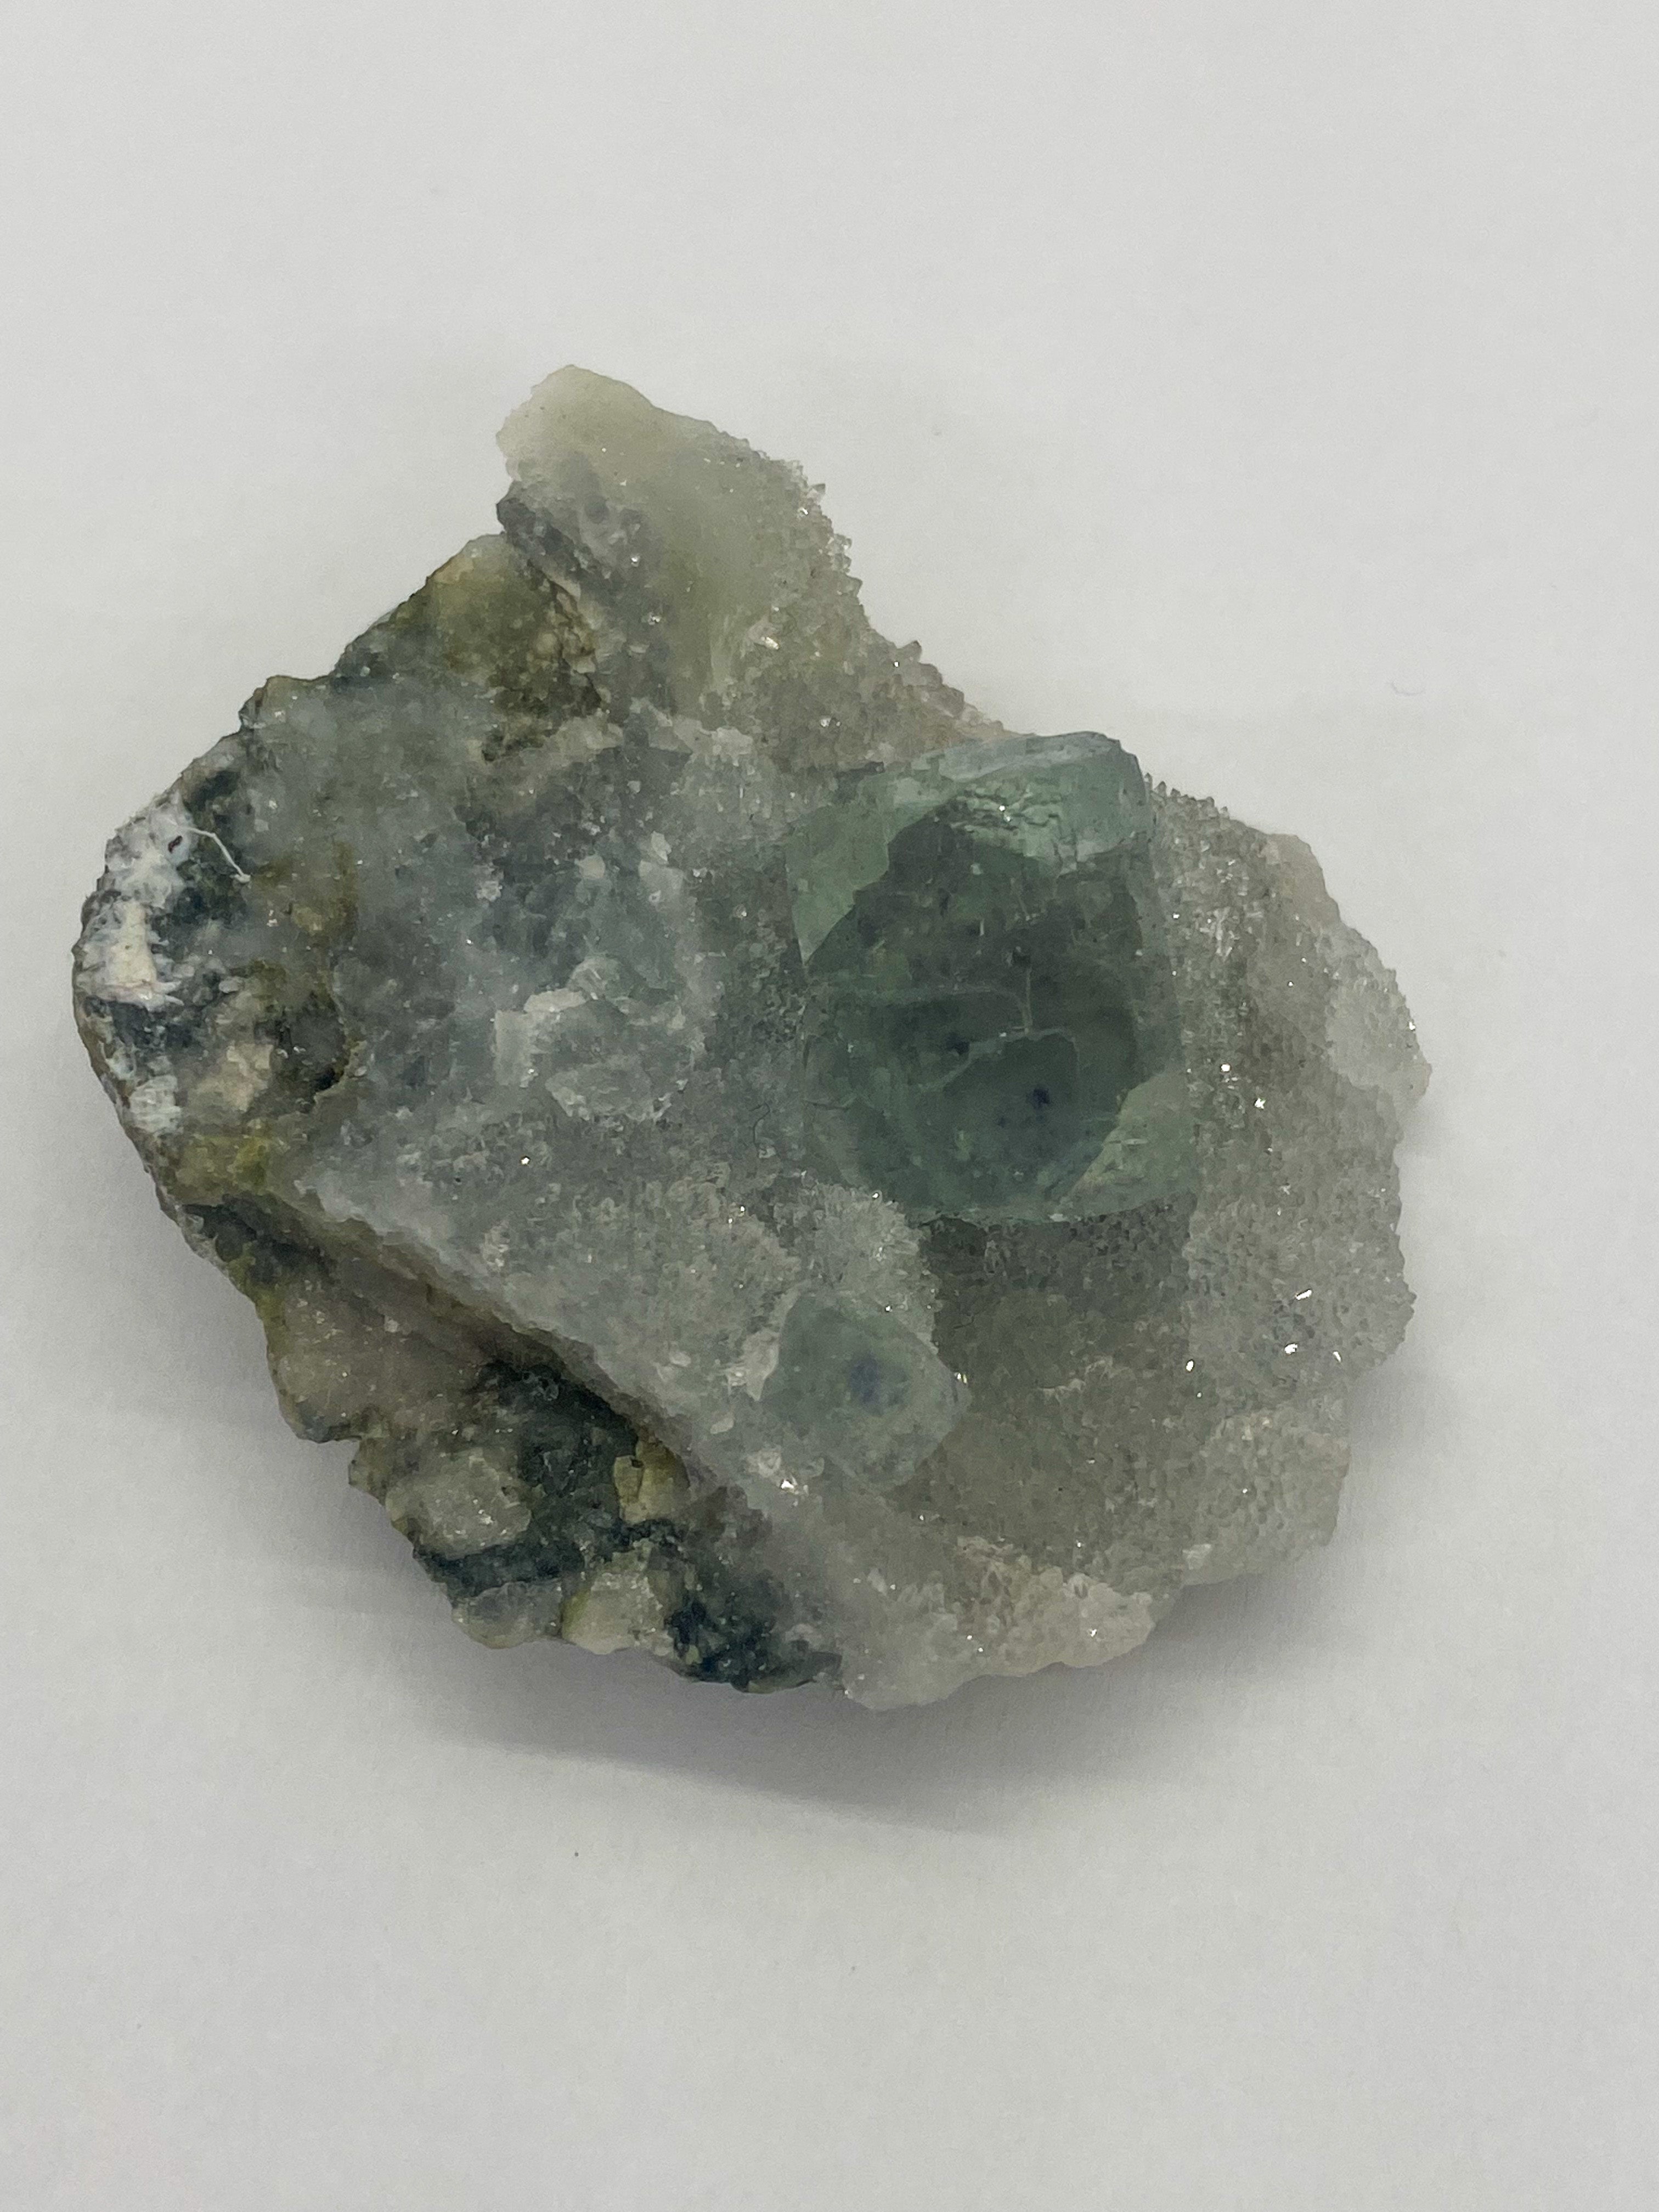 Light green Clear Fluorite with Inclusion on Druzy Quartz